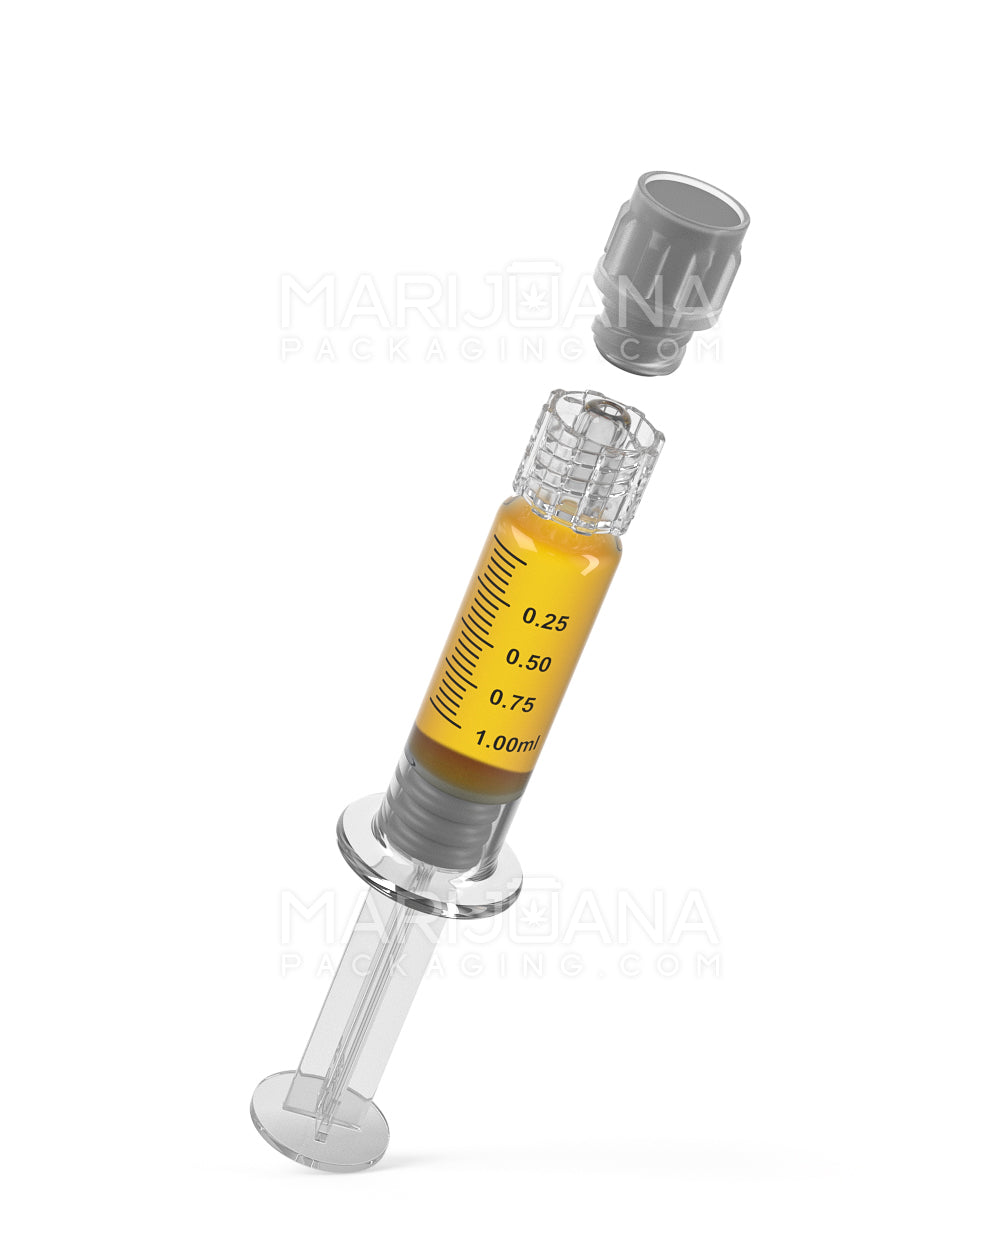 Luer Lock | Glass Dab Applicator Syringes | 1mL - 0.25mL Increments - 100 Count - 6